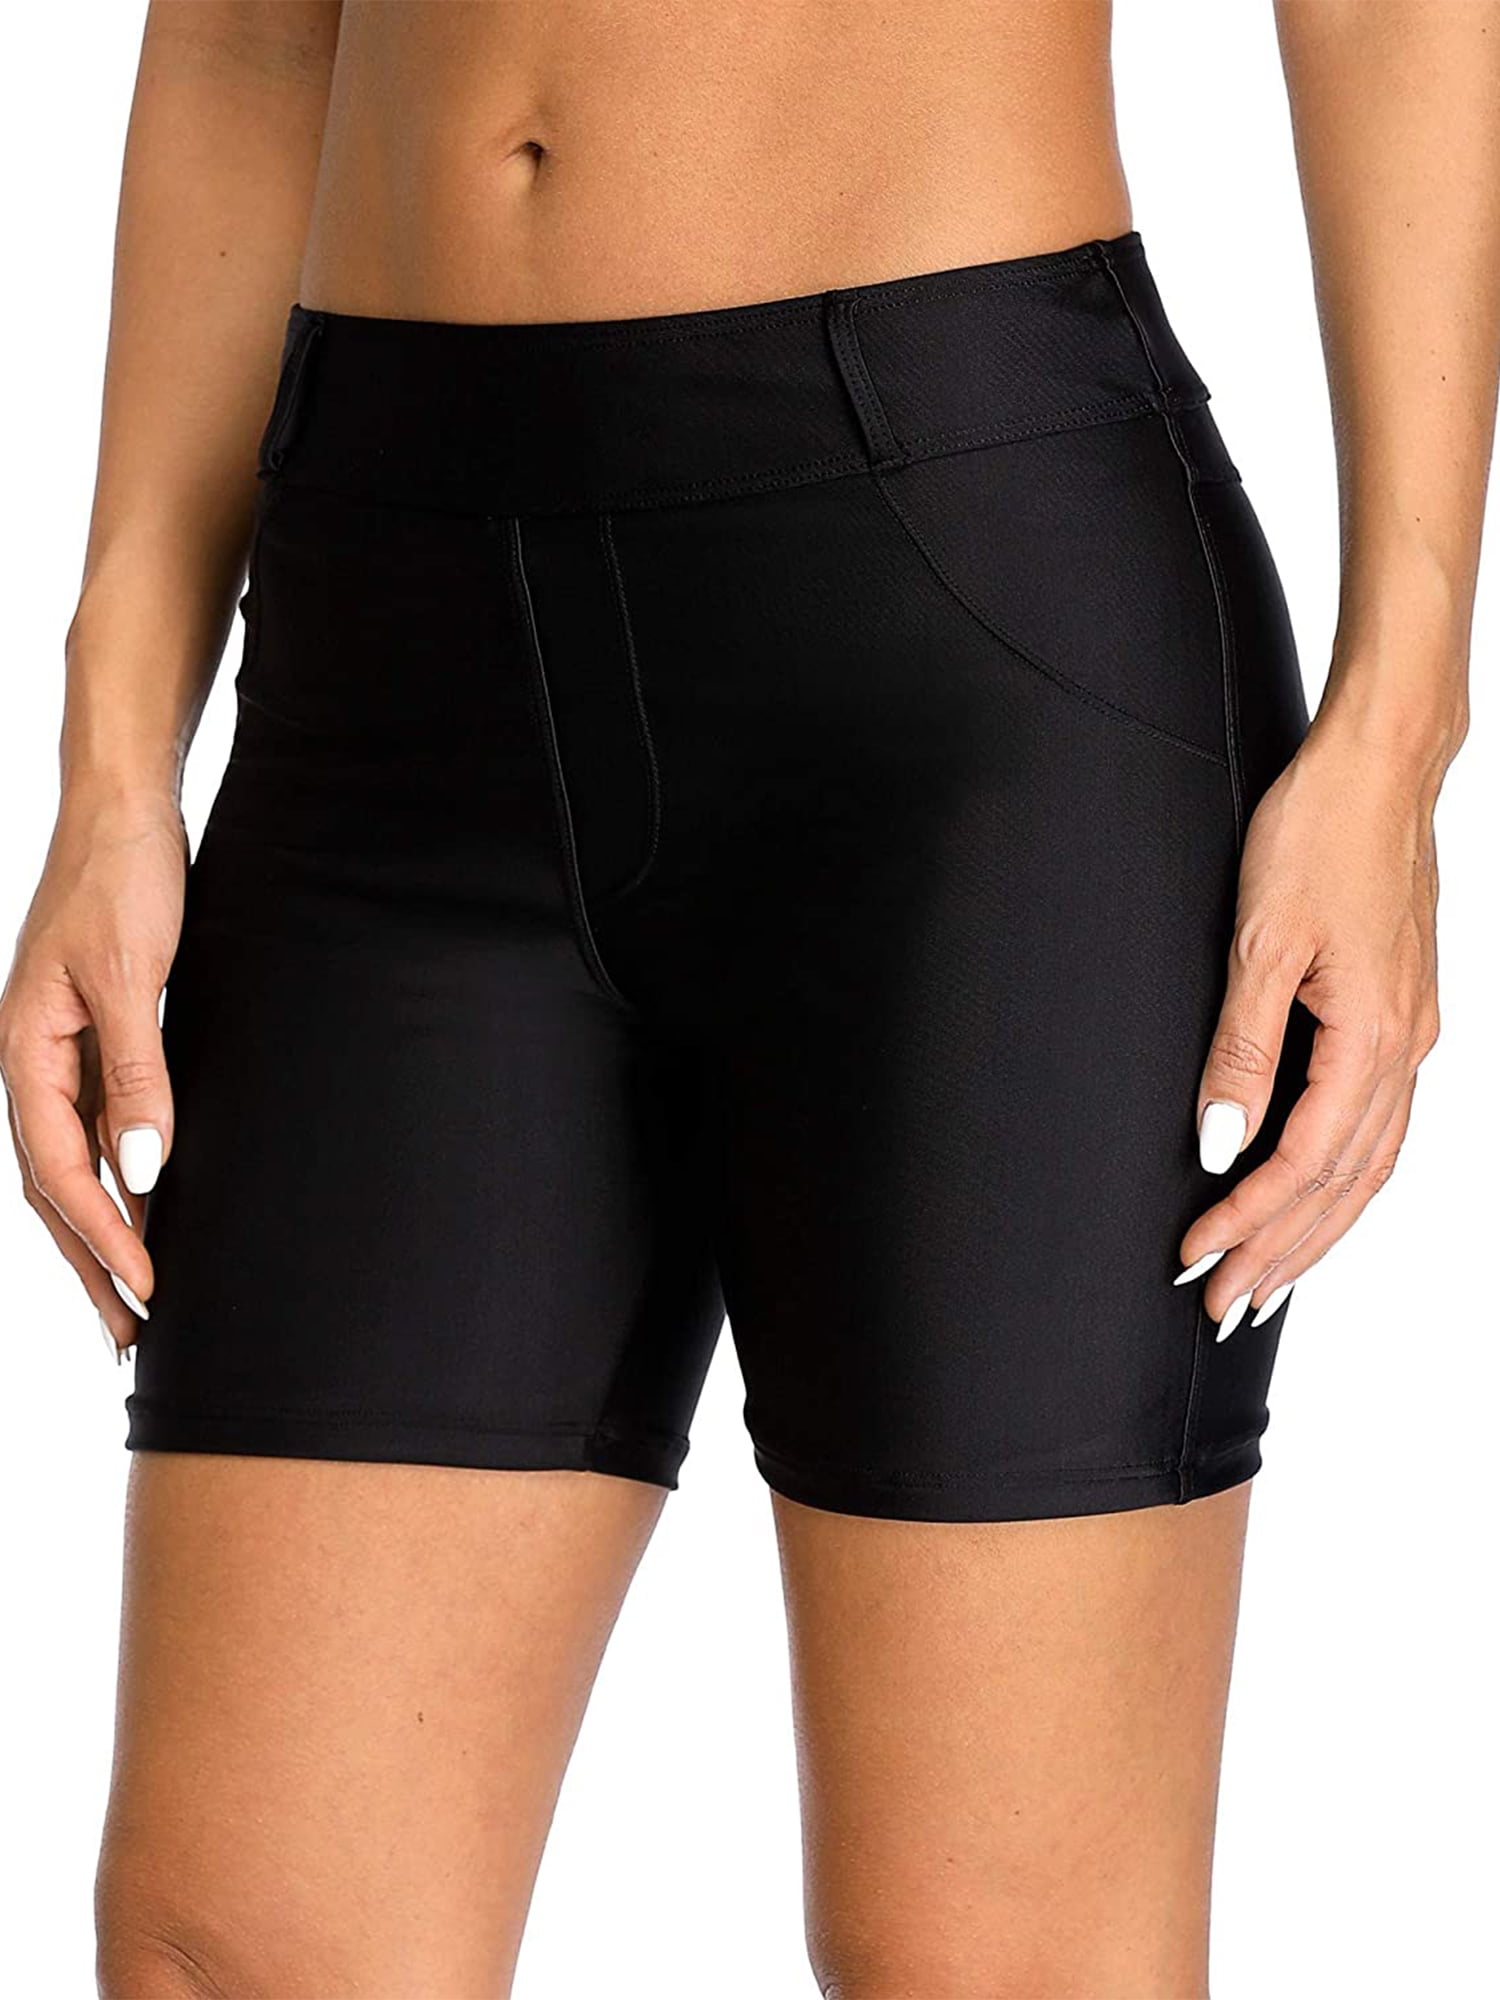 Asoul Women Solid Swim Shorts with Pockets High Waisted Swim ...